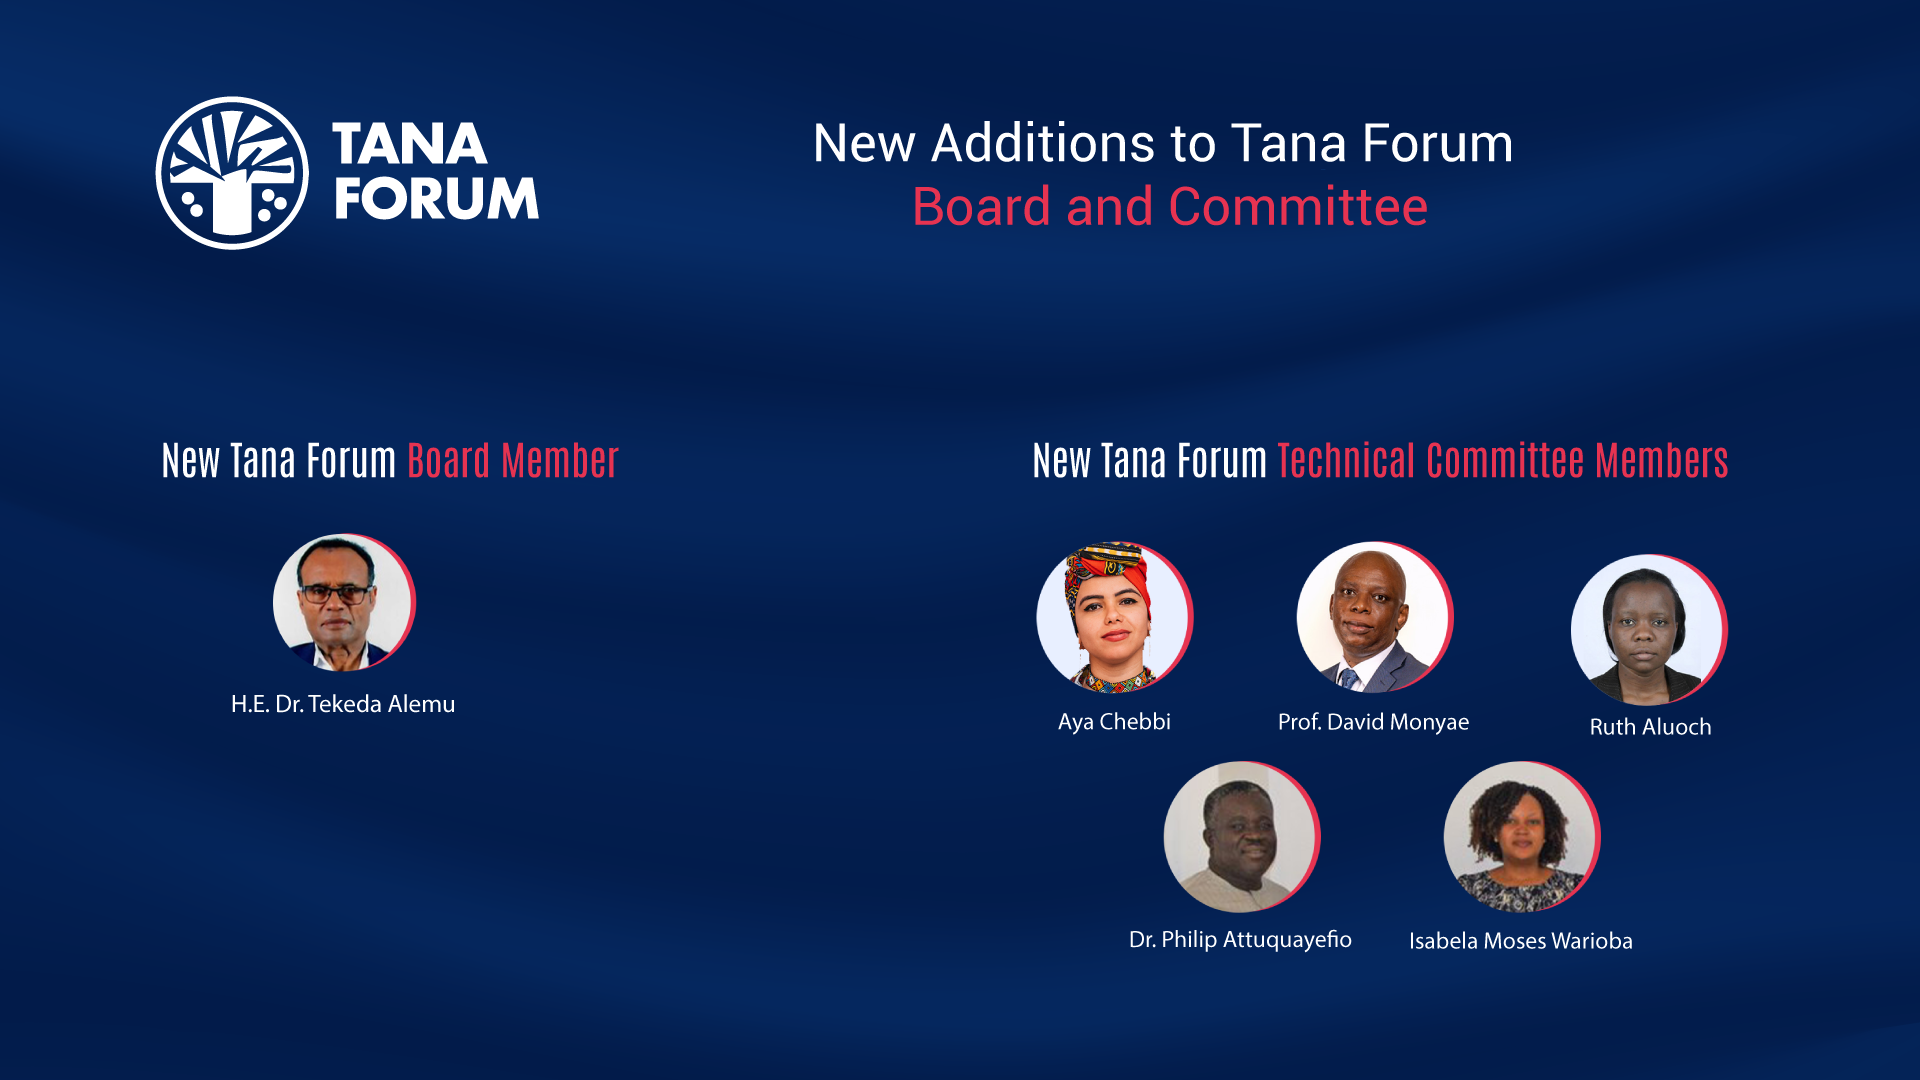 New Additions to Tana Forum Board and Committee